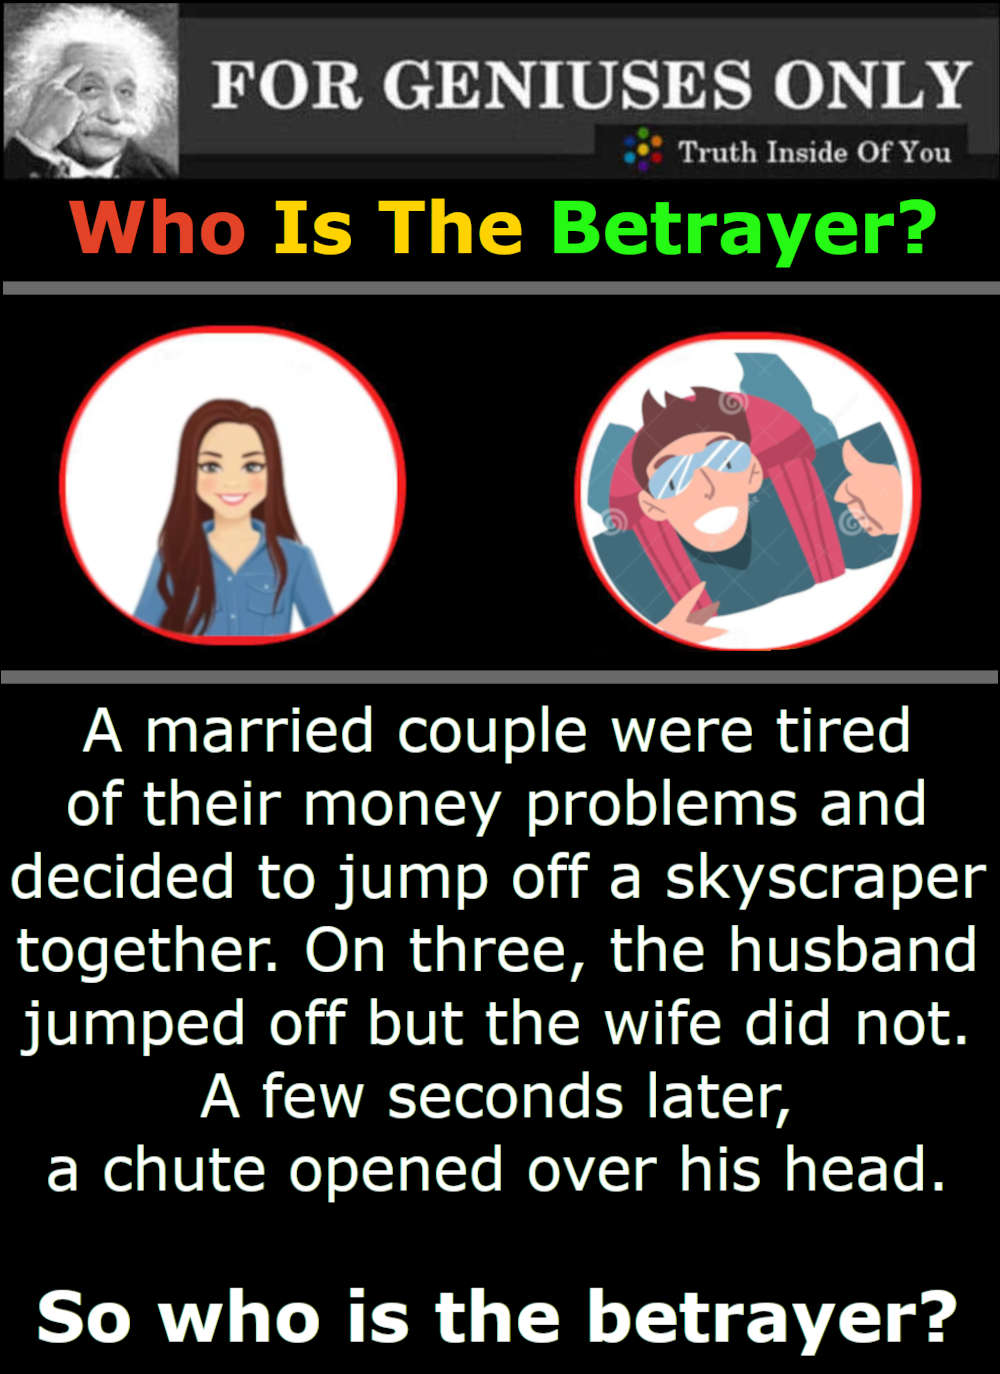 Who Is The Betrayer?